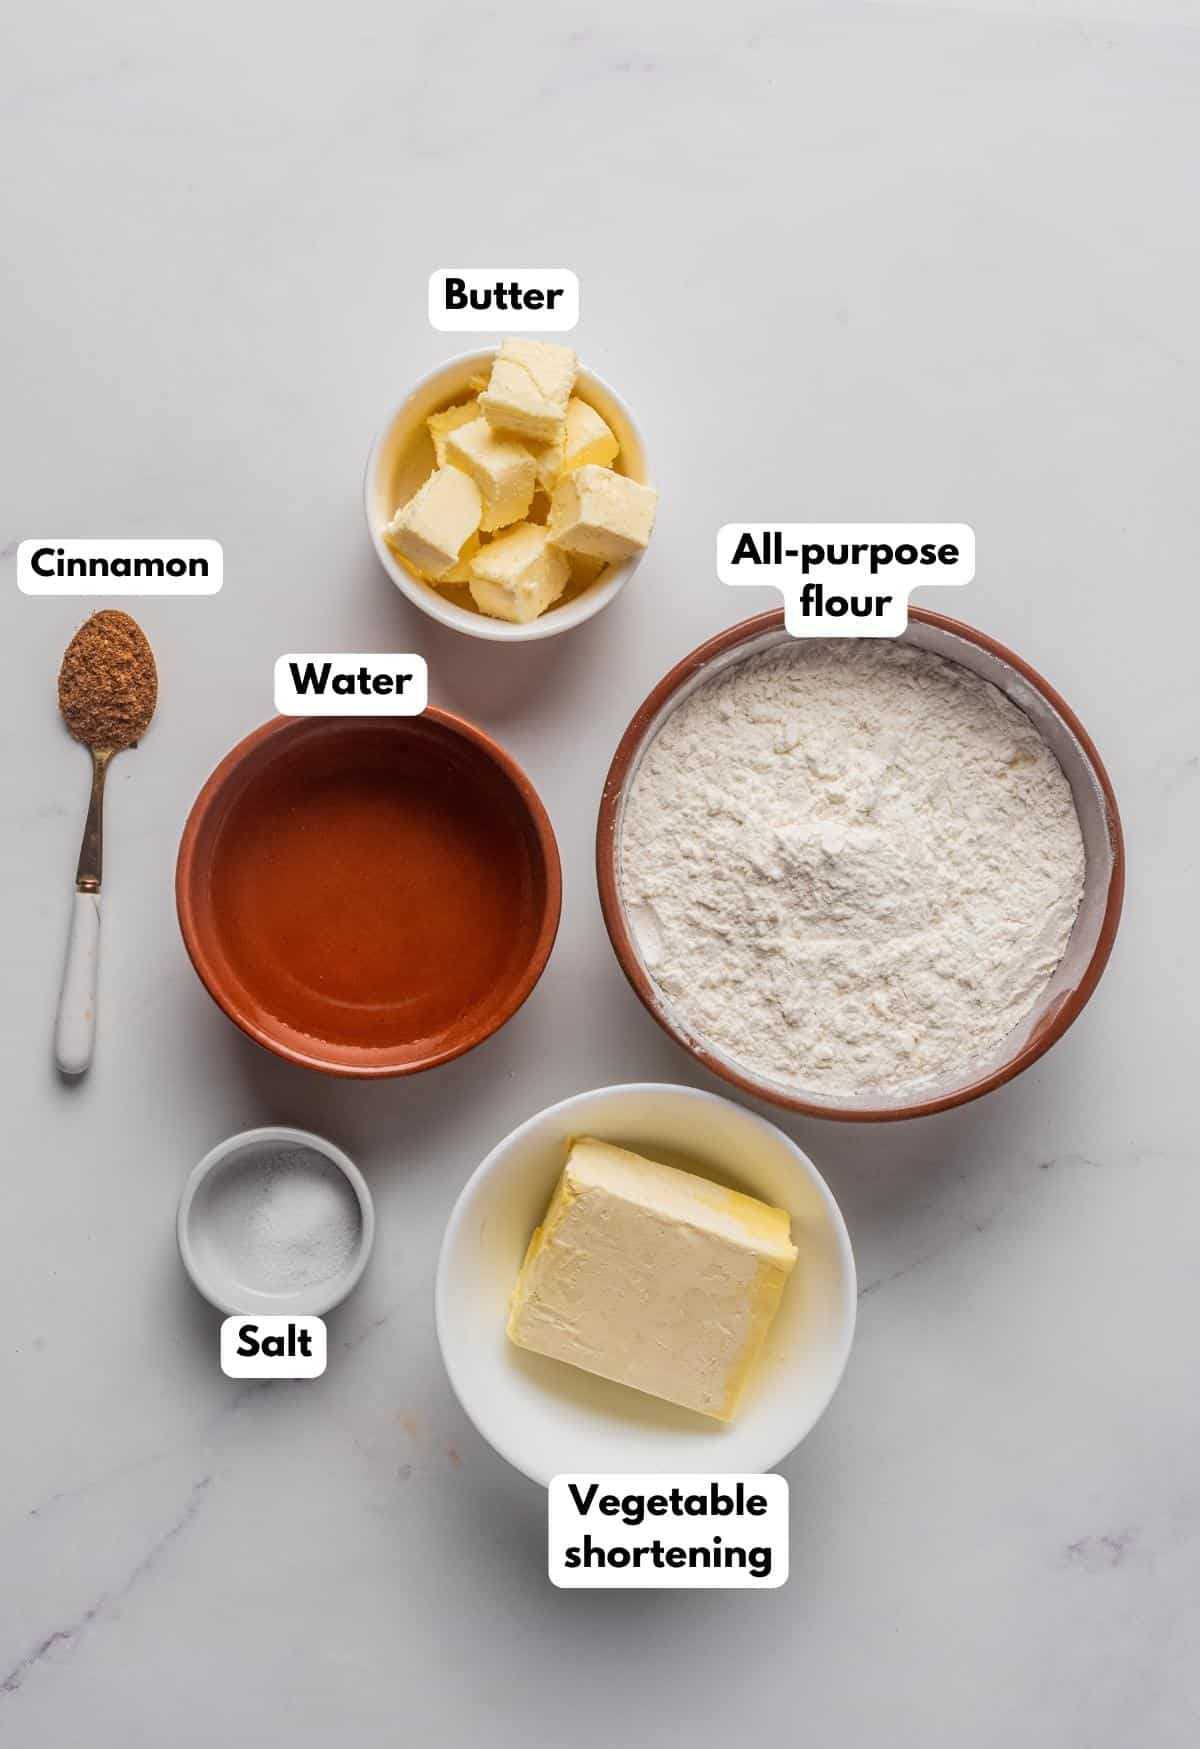 The ingredients needed to make the dough.